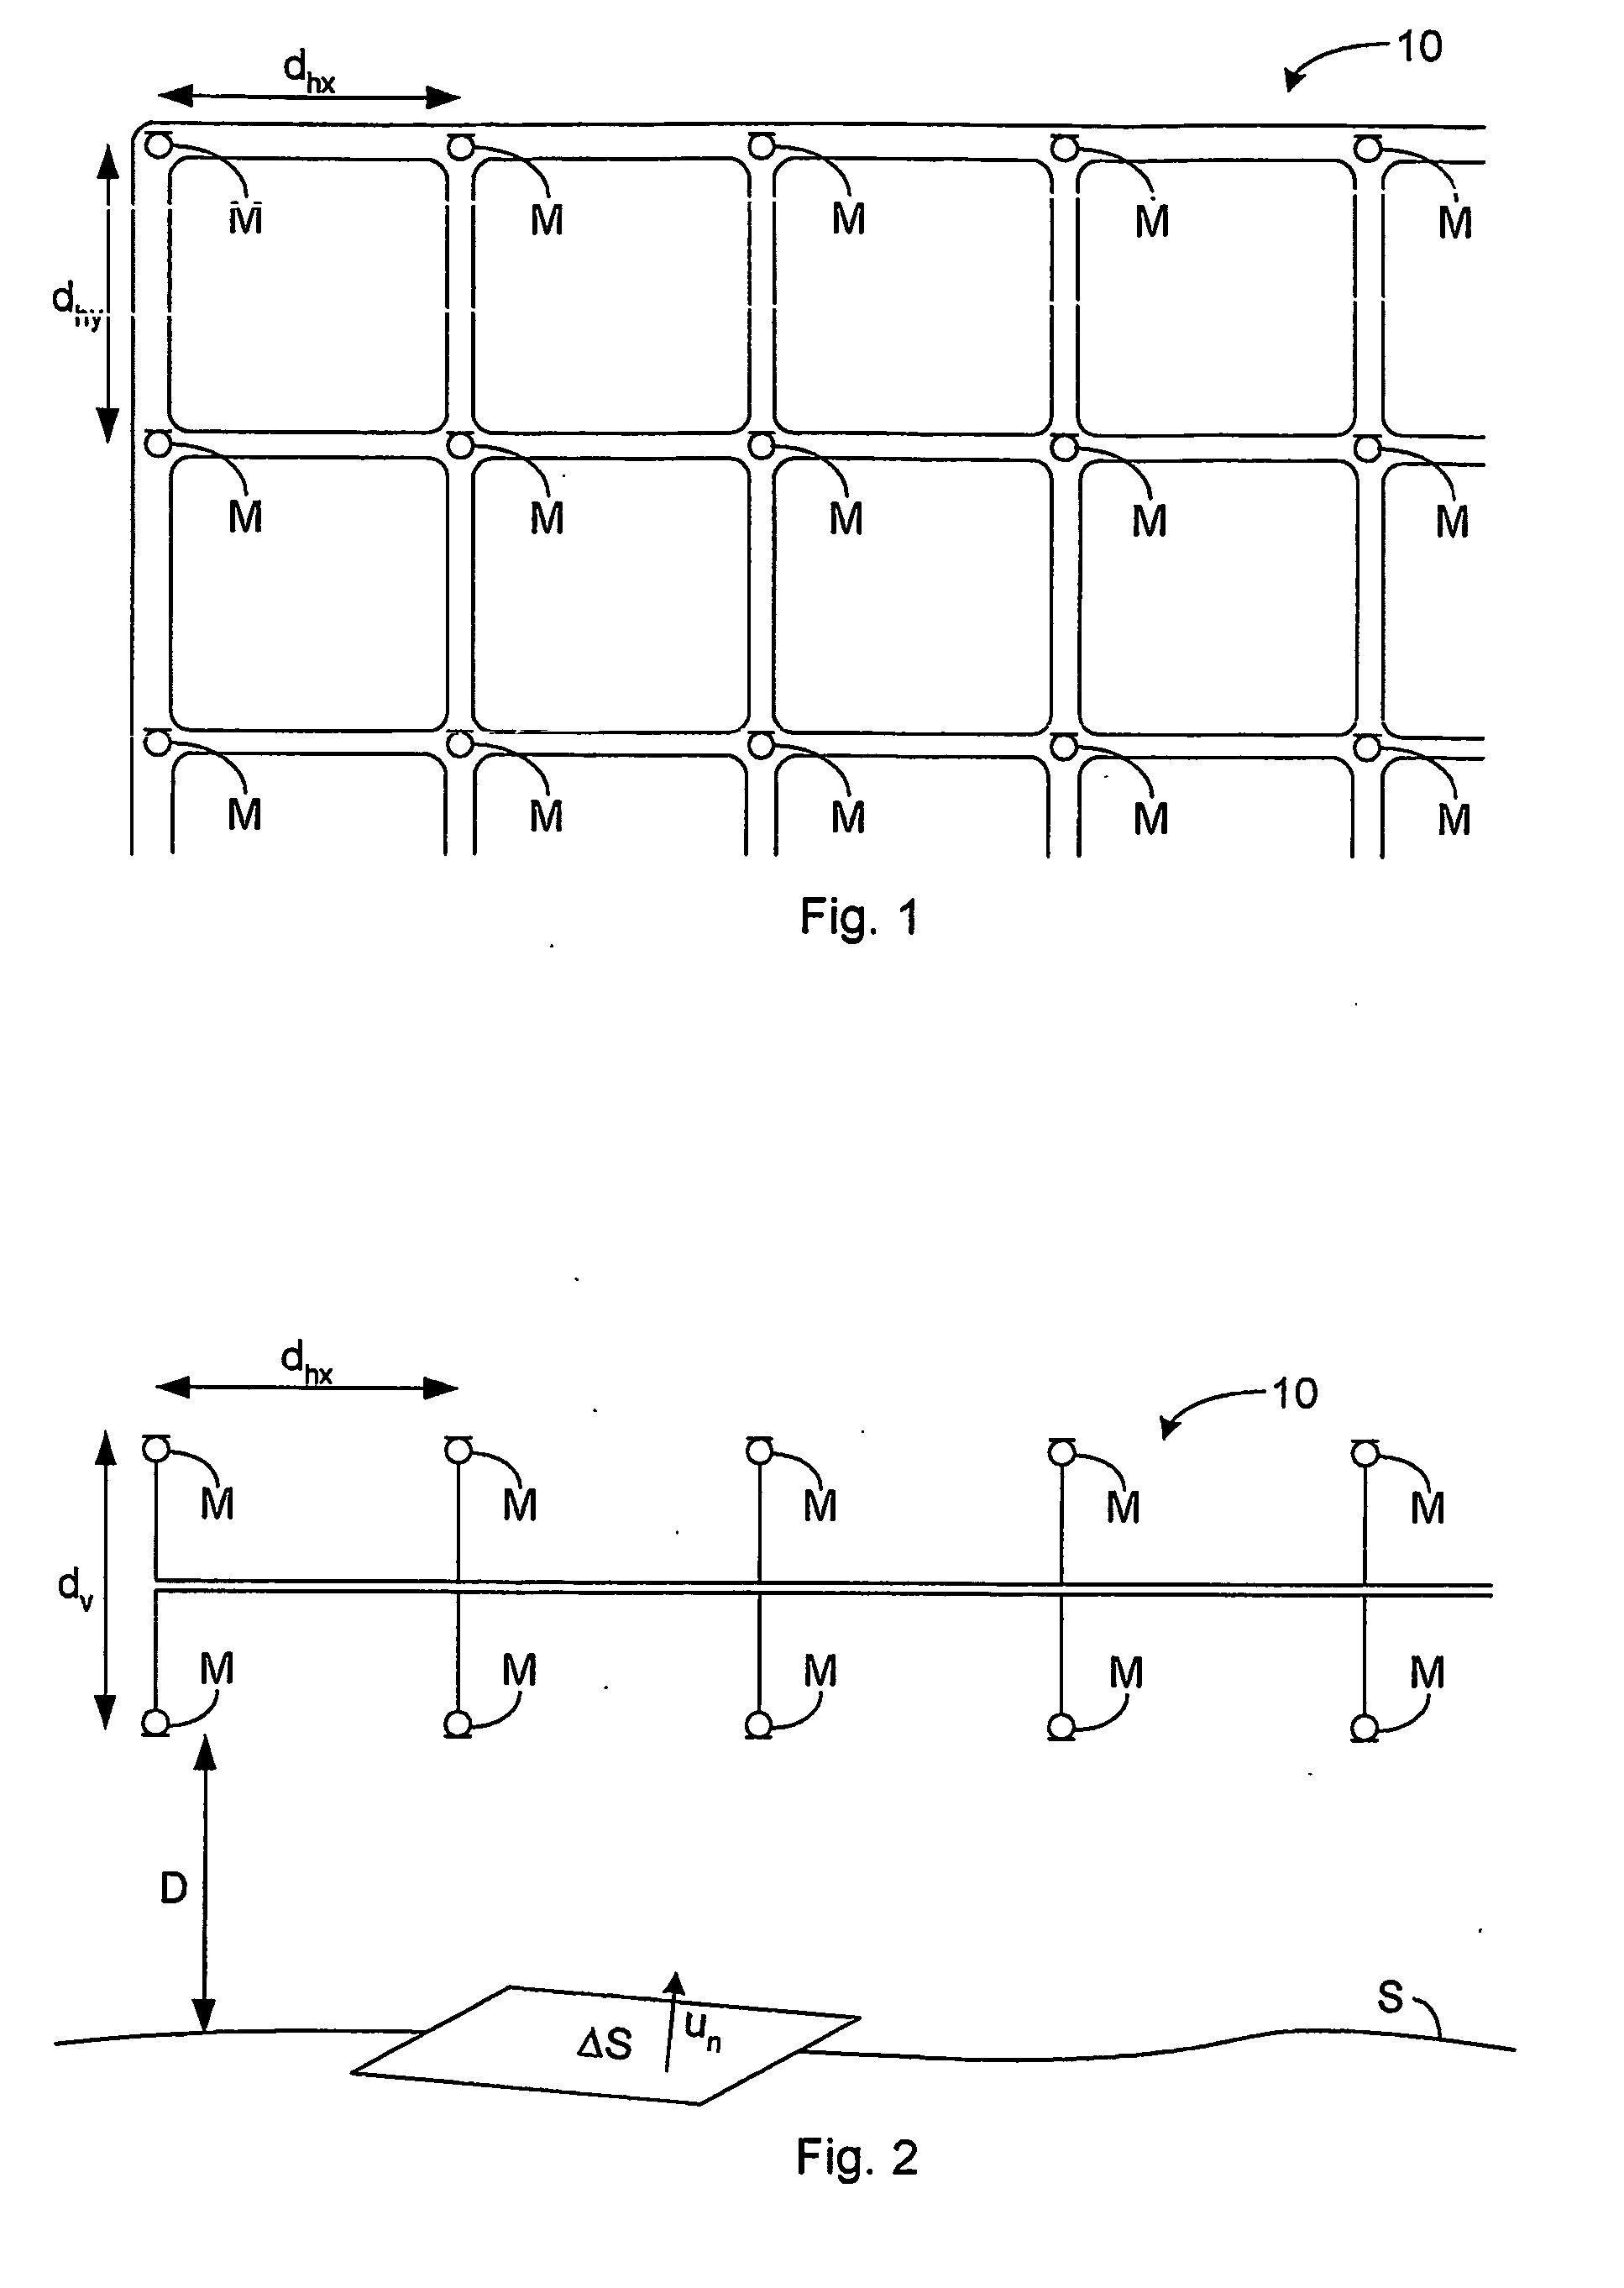 Method of determining the sound pressure resulting from a surface element of a sound emitting device